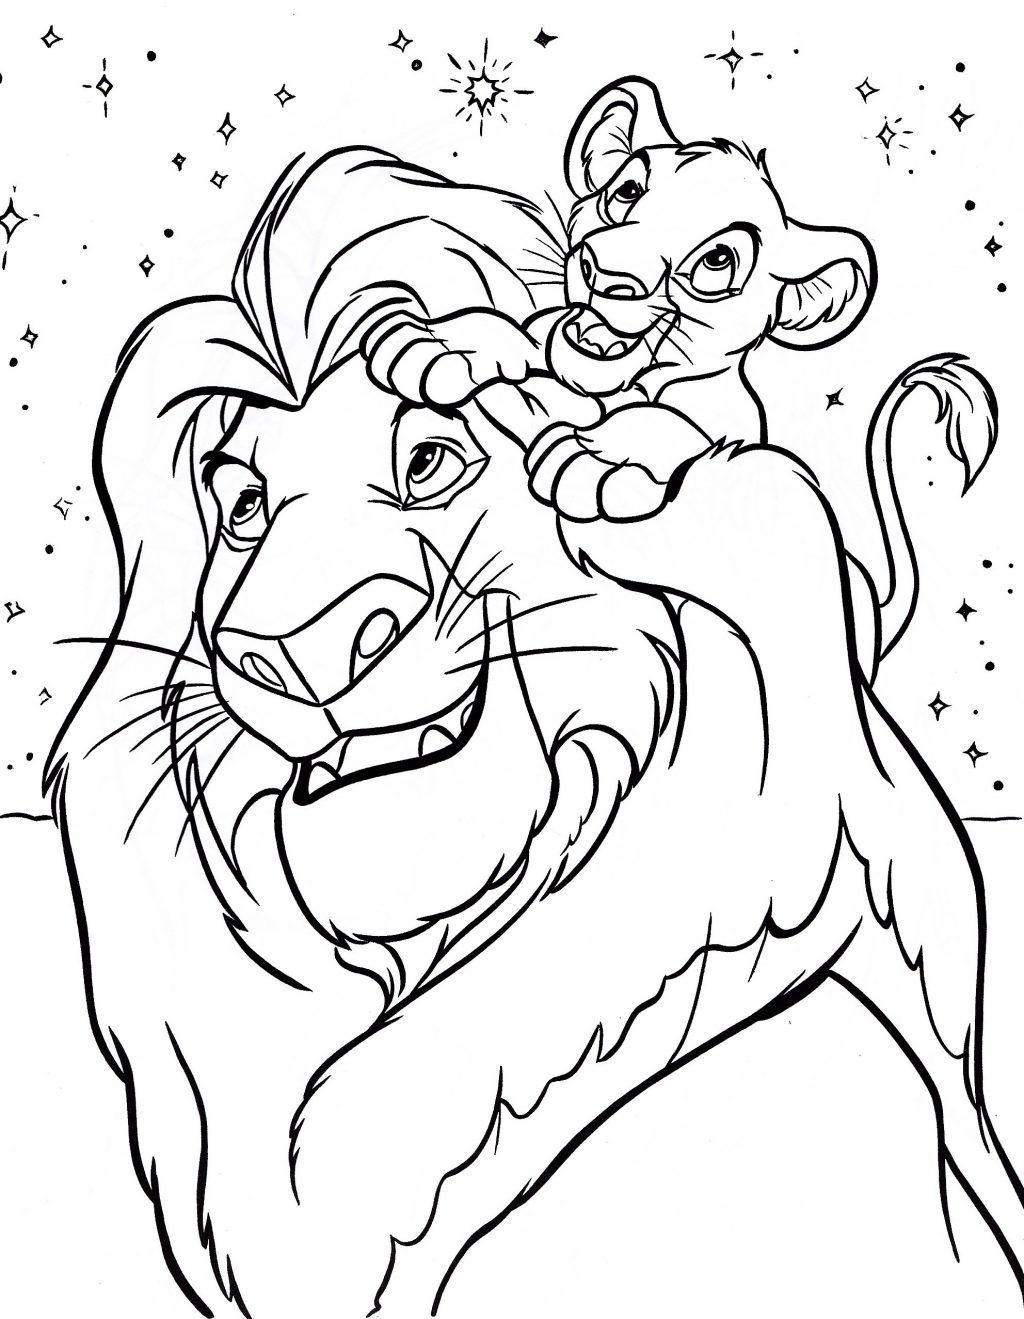 Disney Color Pages Free Coloring Page Best Disney Printable Coloring Pages Ideas Full Size